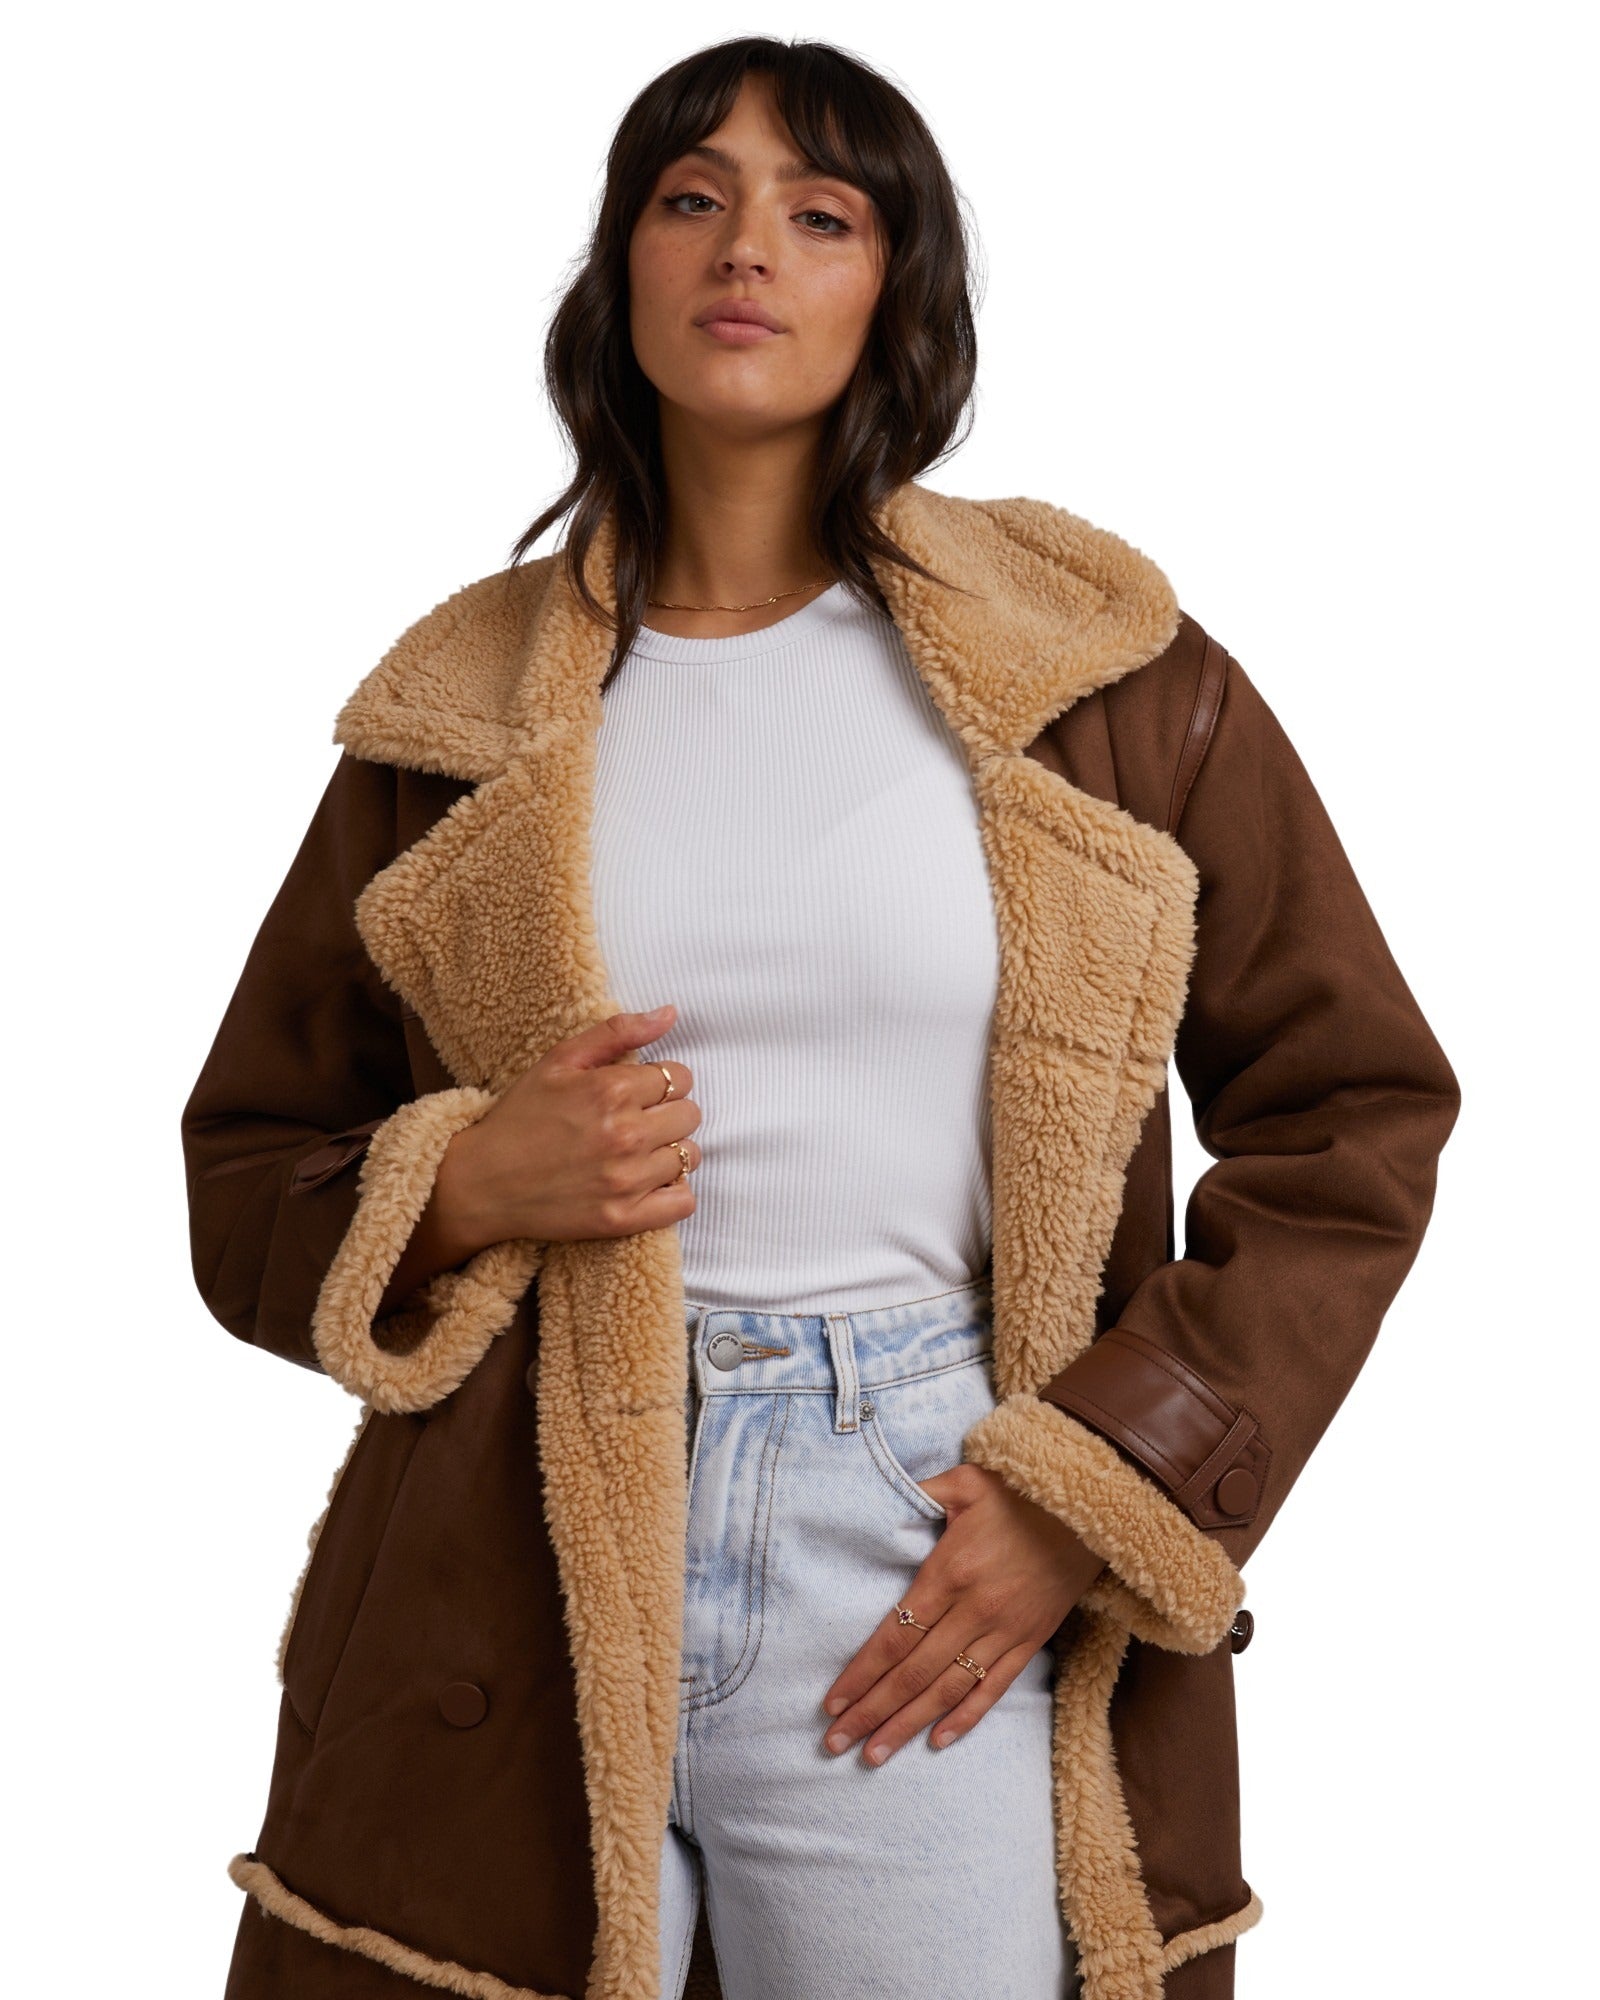 All About Eve - Mia Sherpa Coat - Brown